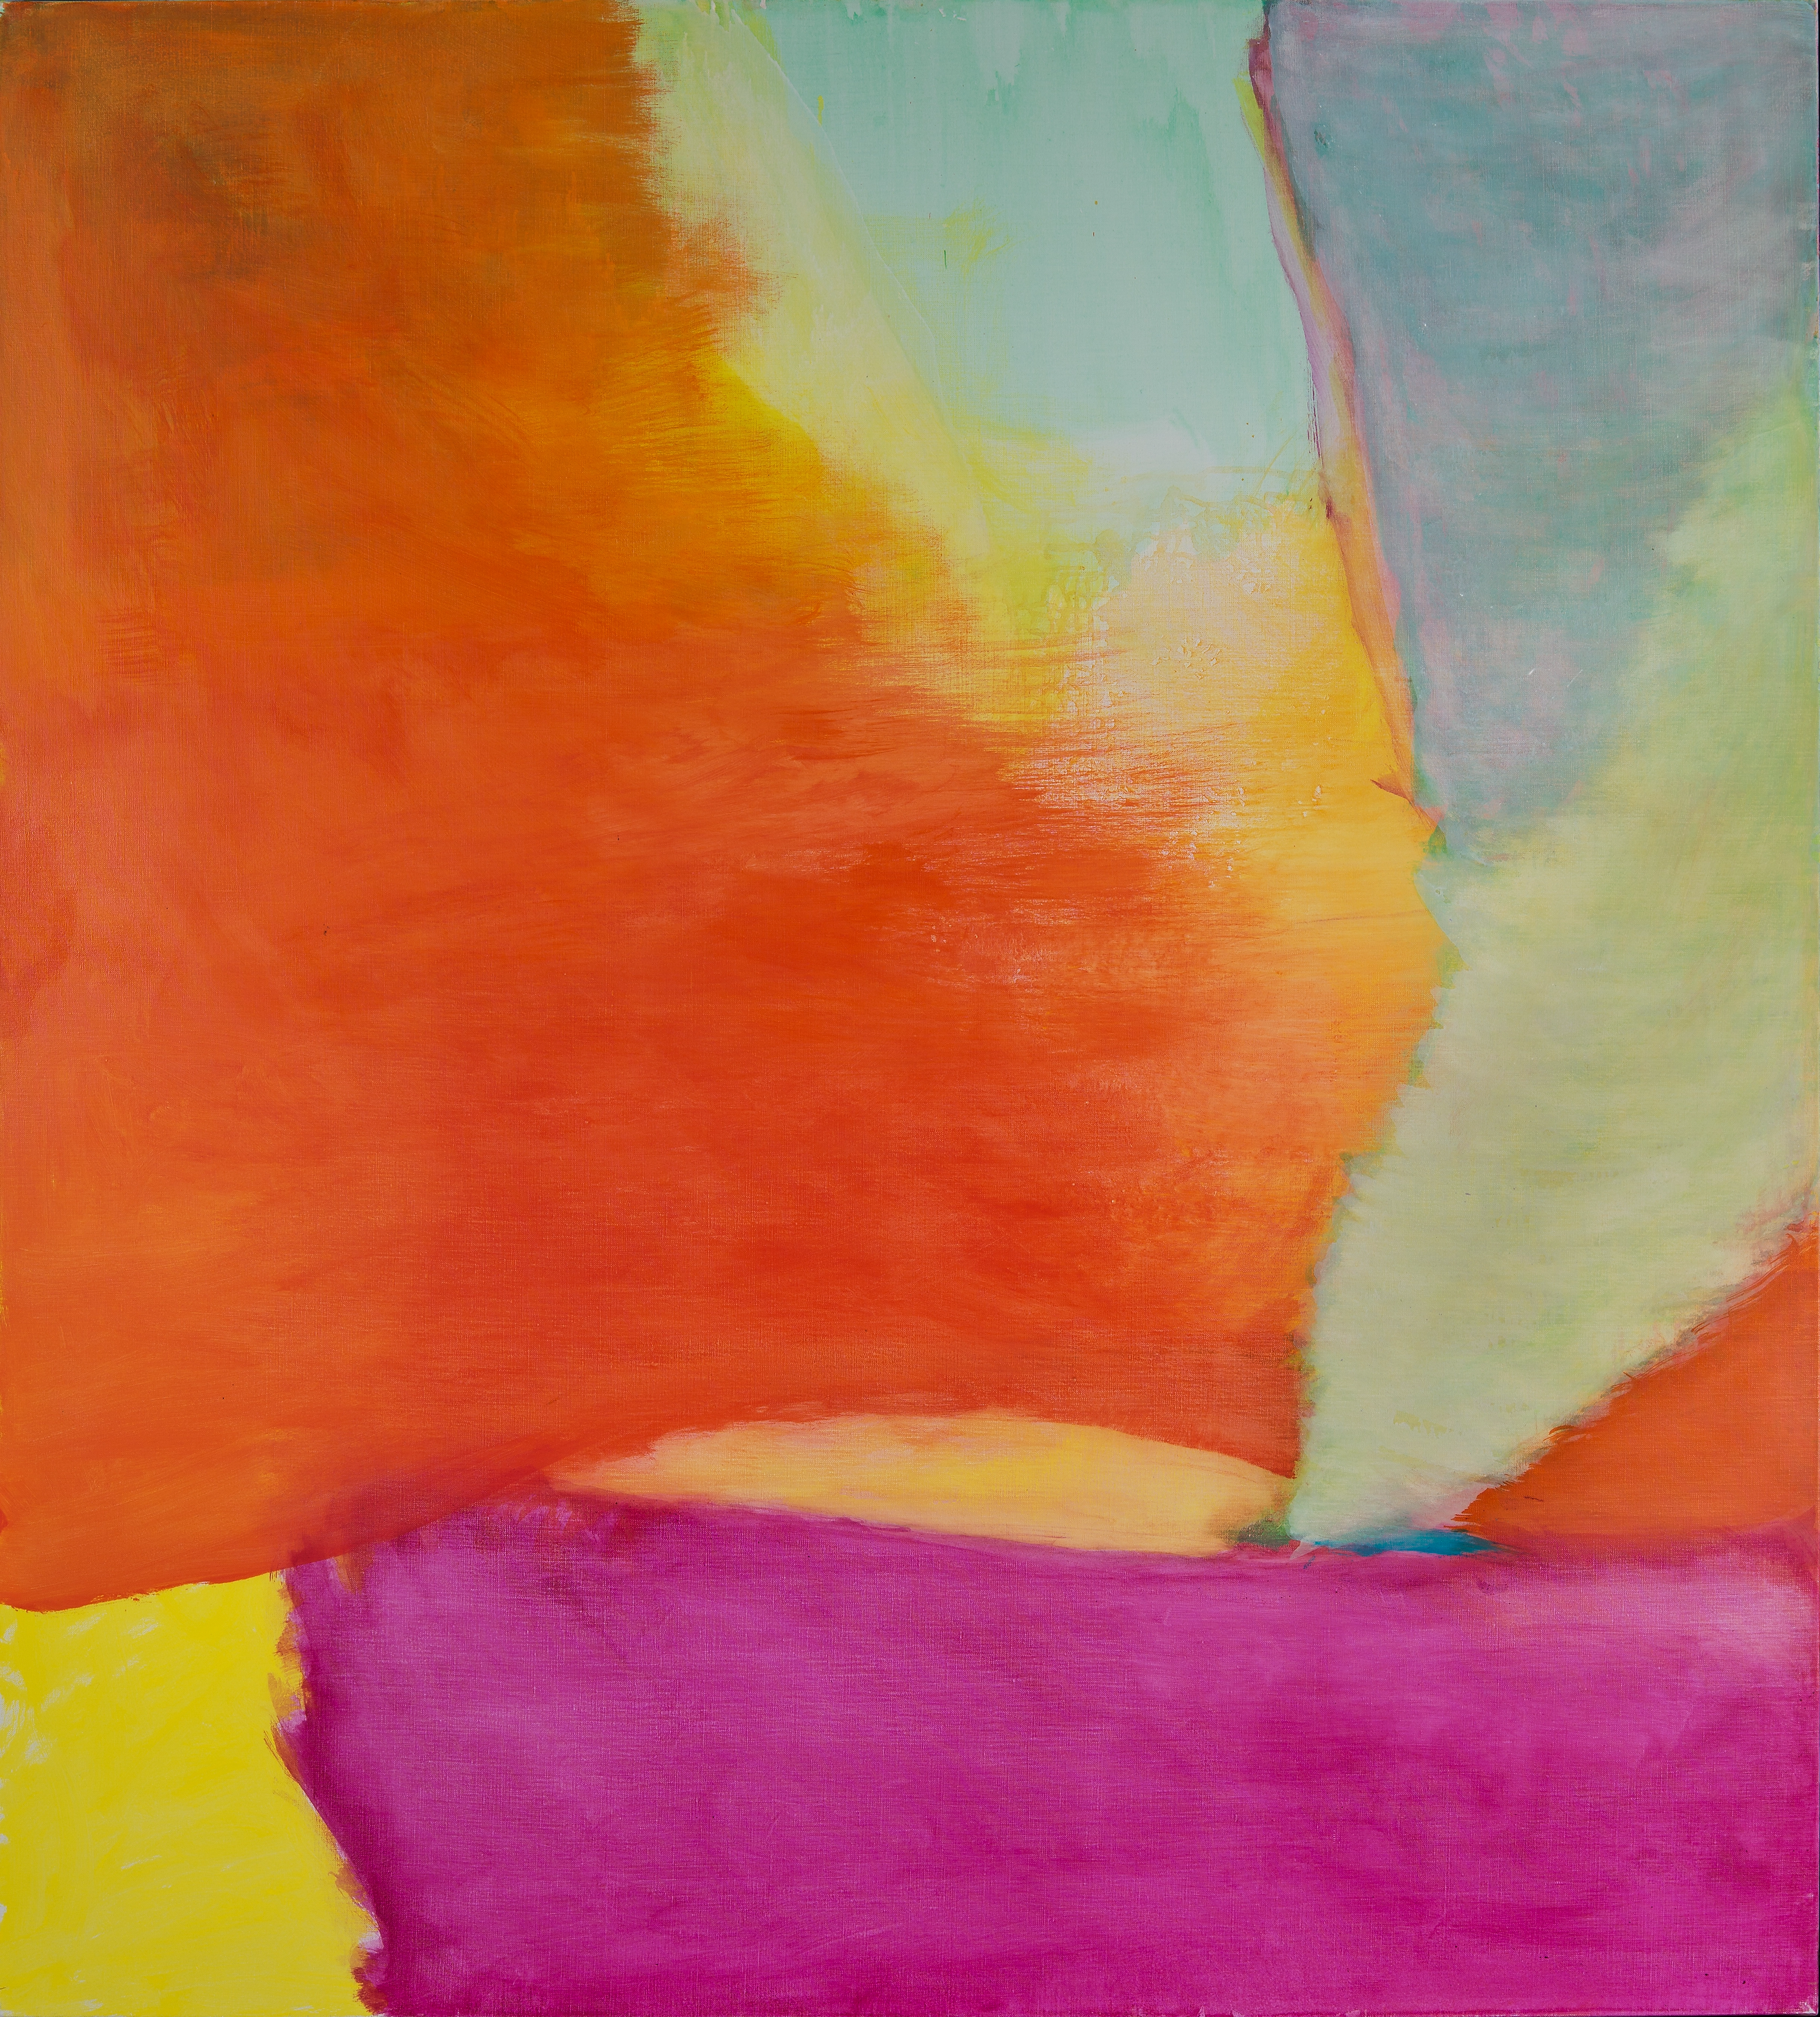 Down Wind by Emily Mason is an abstract oil painting. There is a section of light blue tones in the upper right of the canvas, and a large expanse of orange in the upper left. A horizontal, square, magenta form is at the bottom, with yellow peeking from behind.